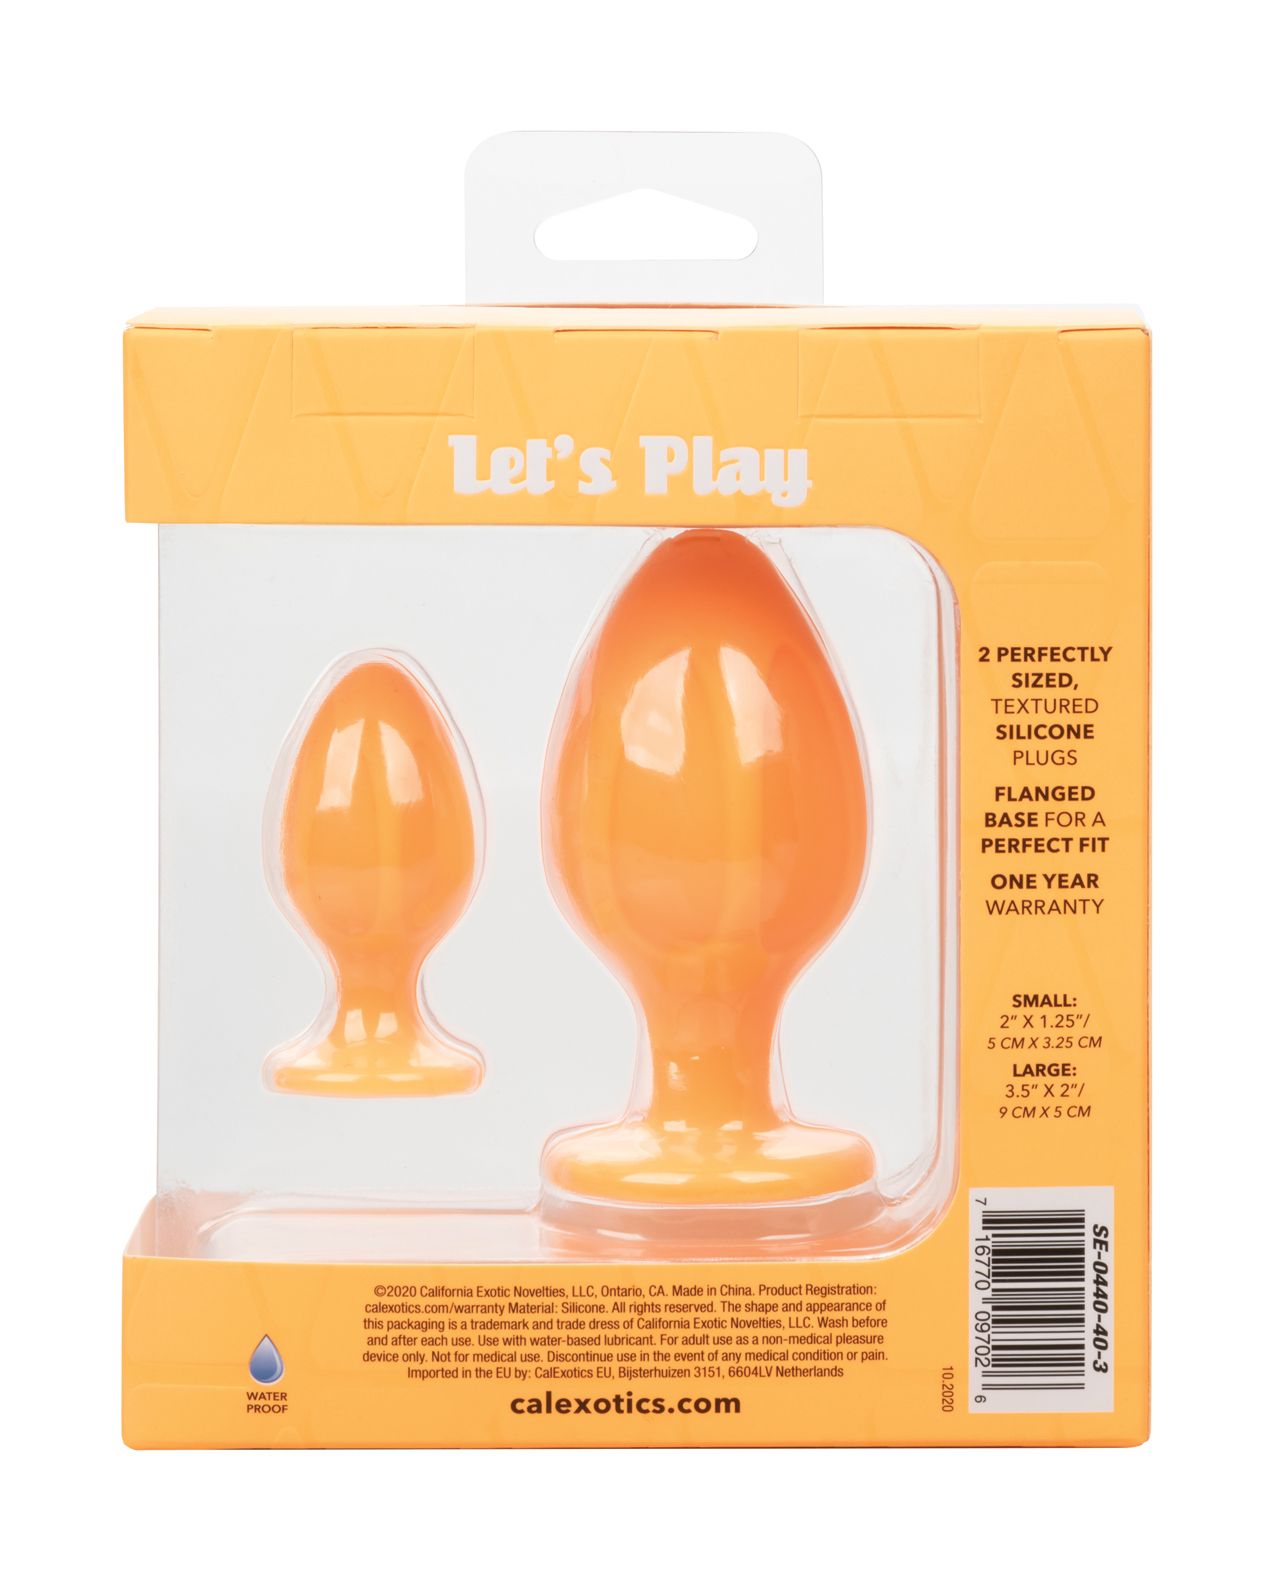 Photo shows the back of the box for the Cheeky Silicone Textured Anal Plugs (2pk/Orange) from CalExotics.